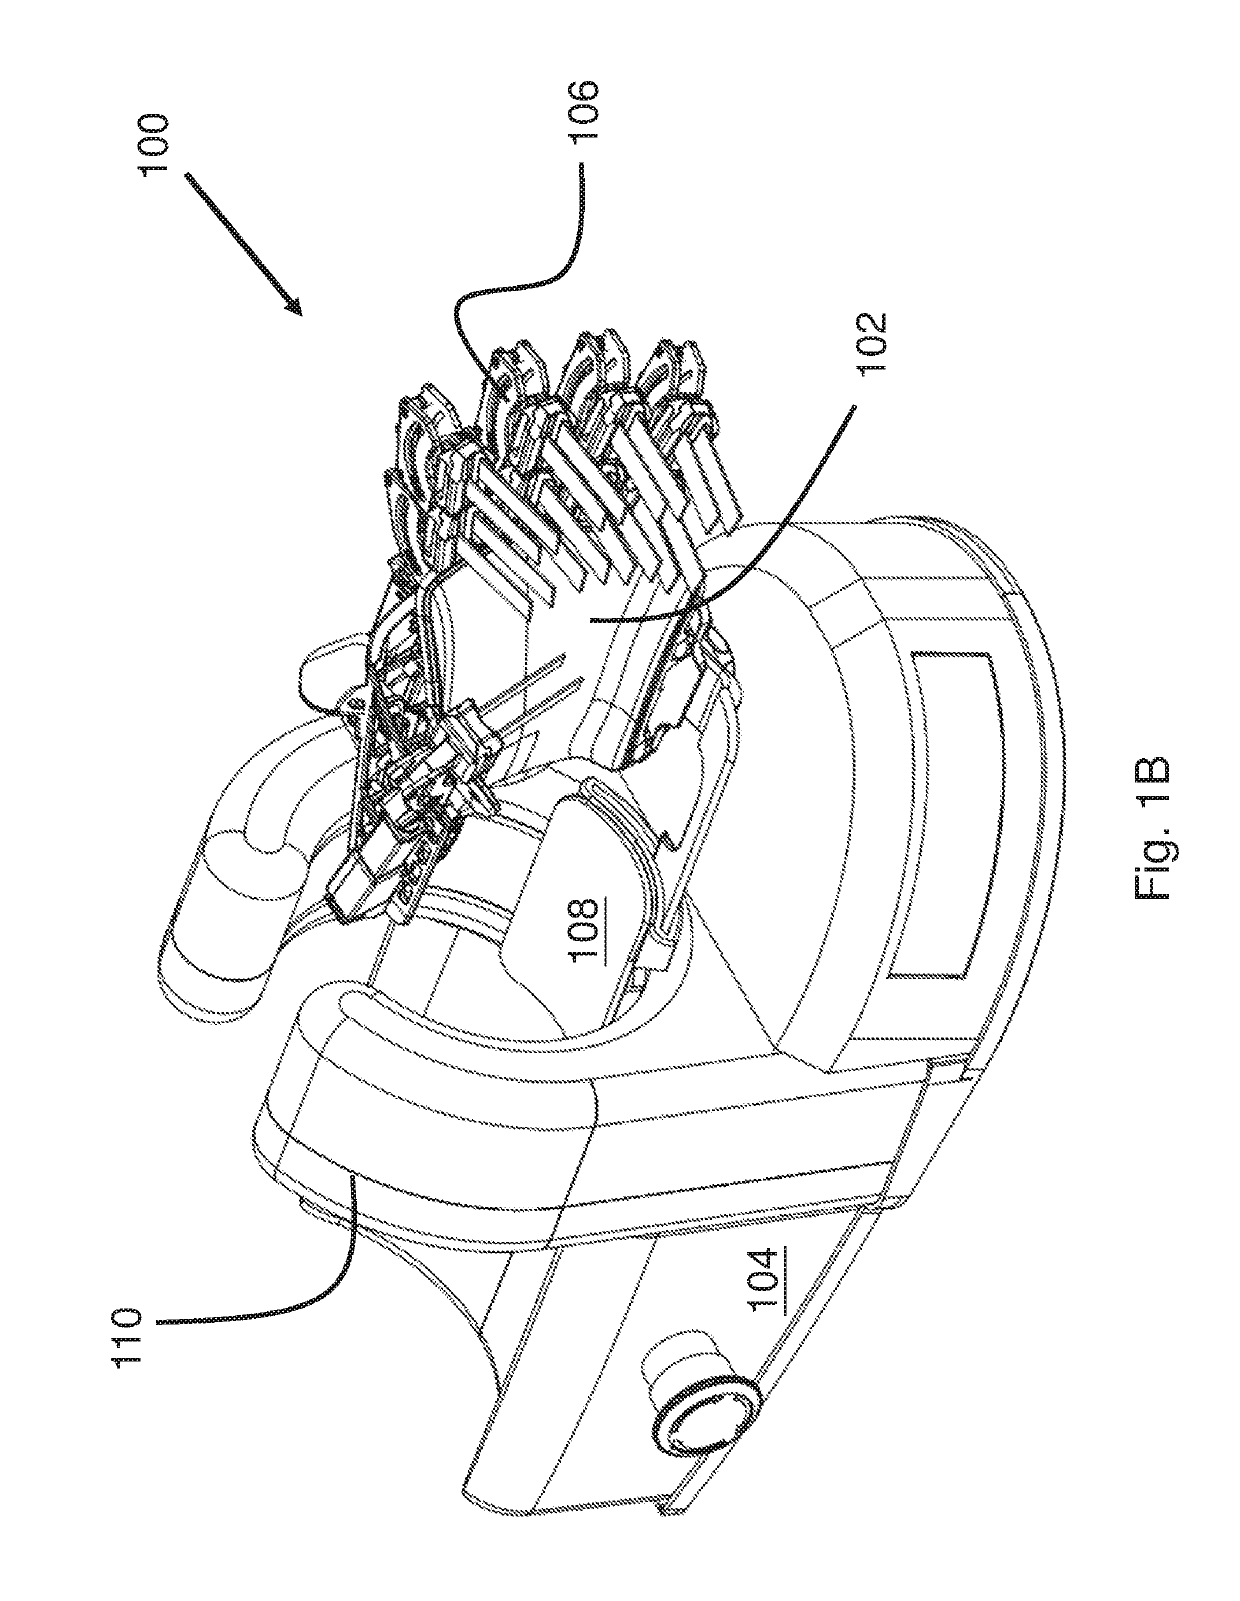 A Power Assistive Device For Hand Rehabilitation And A Method of Using The Same